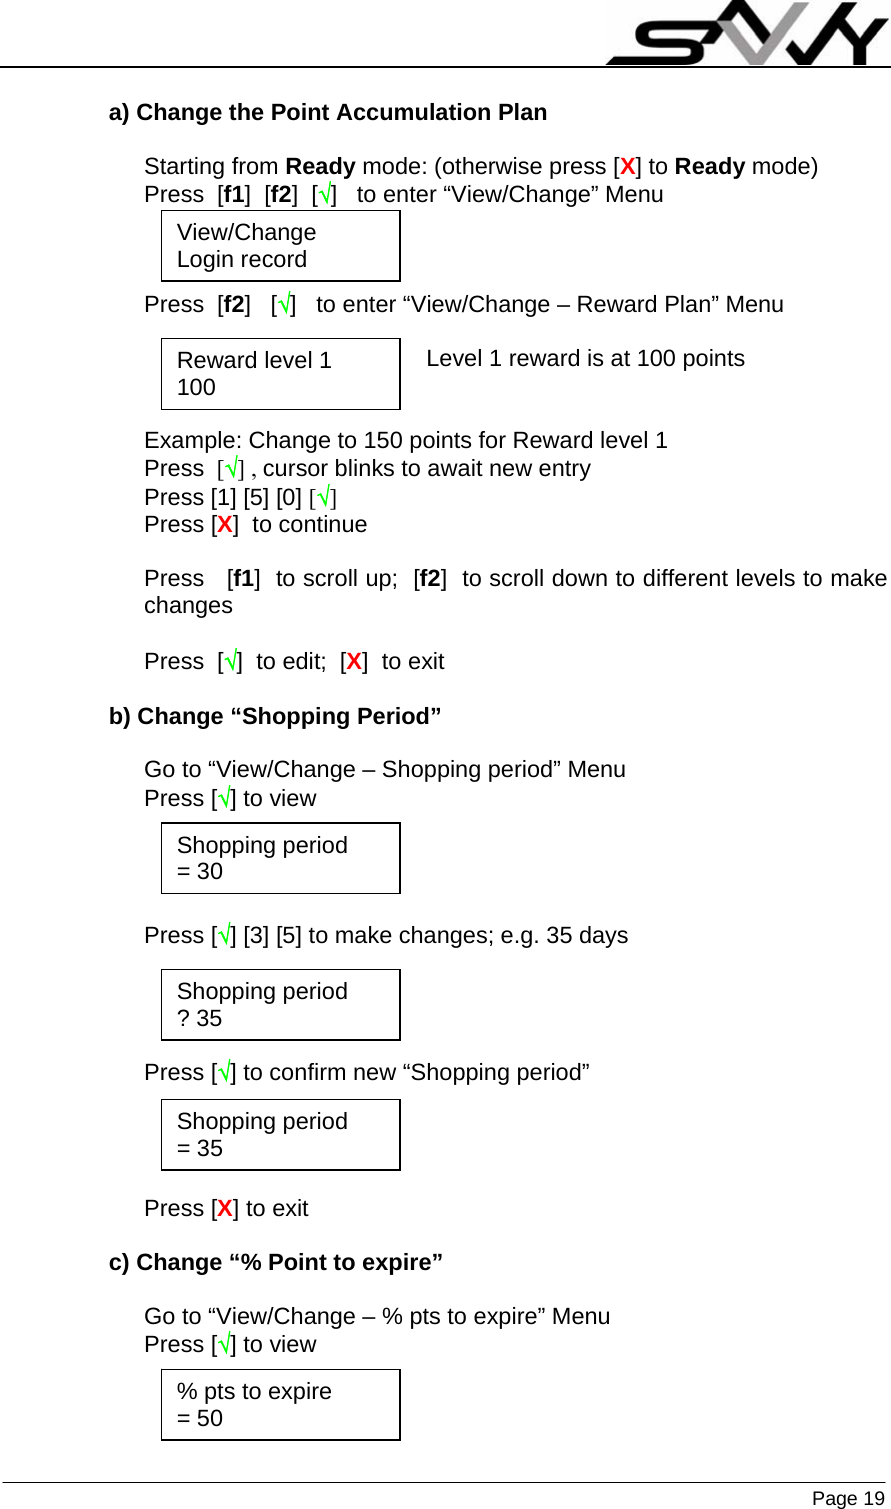                    Page 19   a) Change the Point Accumulation Plan  Starting from Ready mode: (otherwise press [X] to Ready mode) Press  [f1]  [f2]  [√]   to enter “View/Change” Menu          Press  [f2]   [√]   to enter “View/Change – Reward Plan” Menu  Level 1 reward is at 100 points   Example: Change to 150 points for Reward level 1  Press  [√] , cursor blinks to await new entry Press [1] [5] [0] [√] Press [X]  to continue  Press   [f1]  to scroll up;  [f2]  to scroll down to different levels to make changes  Press  [√]  to edit;  [X]  to exit  b) Change “Shopping Period”  Go to “View/Change – Shopping period” Menu Press [√] to view     Press [√] [3] [5] to make changes; e.g. 35 days     Press [√] to confirm new “Shopping period”     Press [X] to exit  c) Change “% Point to expire”  Go to “View/Change – % pts to expire” Menu Press [√] to view    View/Change Login record Reward level 1 100 Shopping period = 30 % pts to expire = 50 Shopping period ? 35 Shopping period = 35 